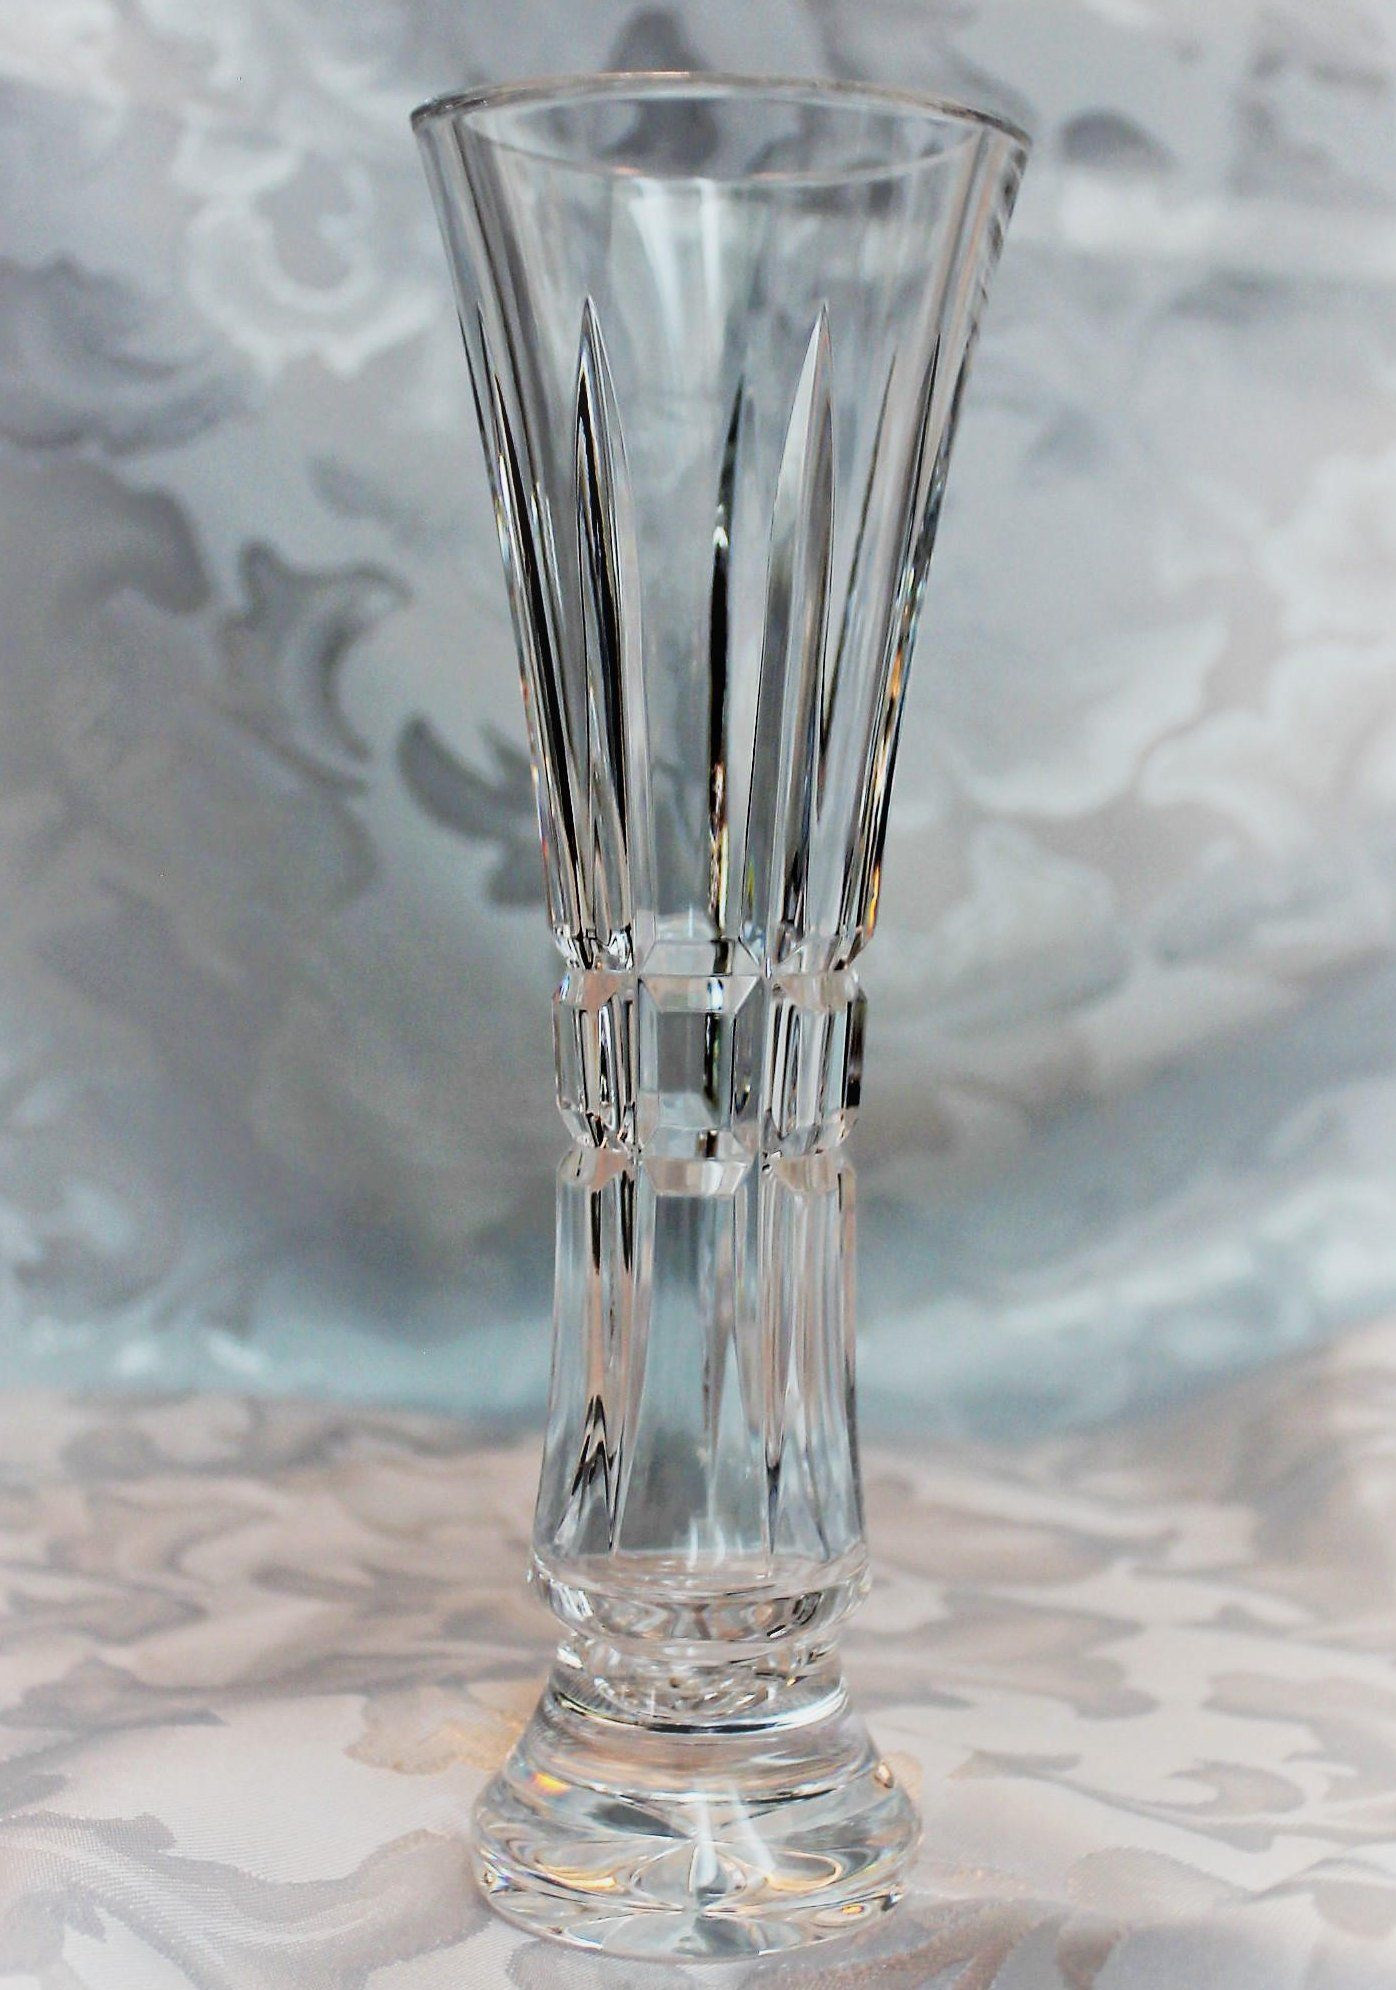 clear glass bottle vase of 22 hobnail glass vase the weekly world with cut glass bud vase